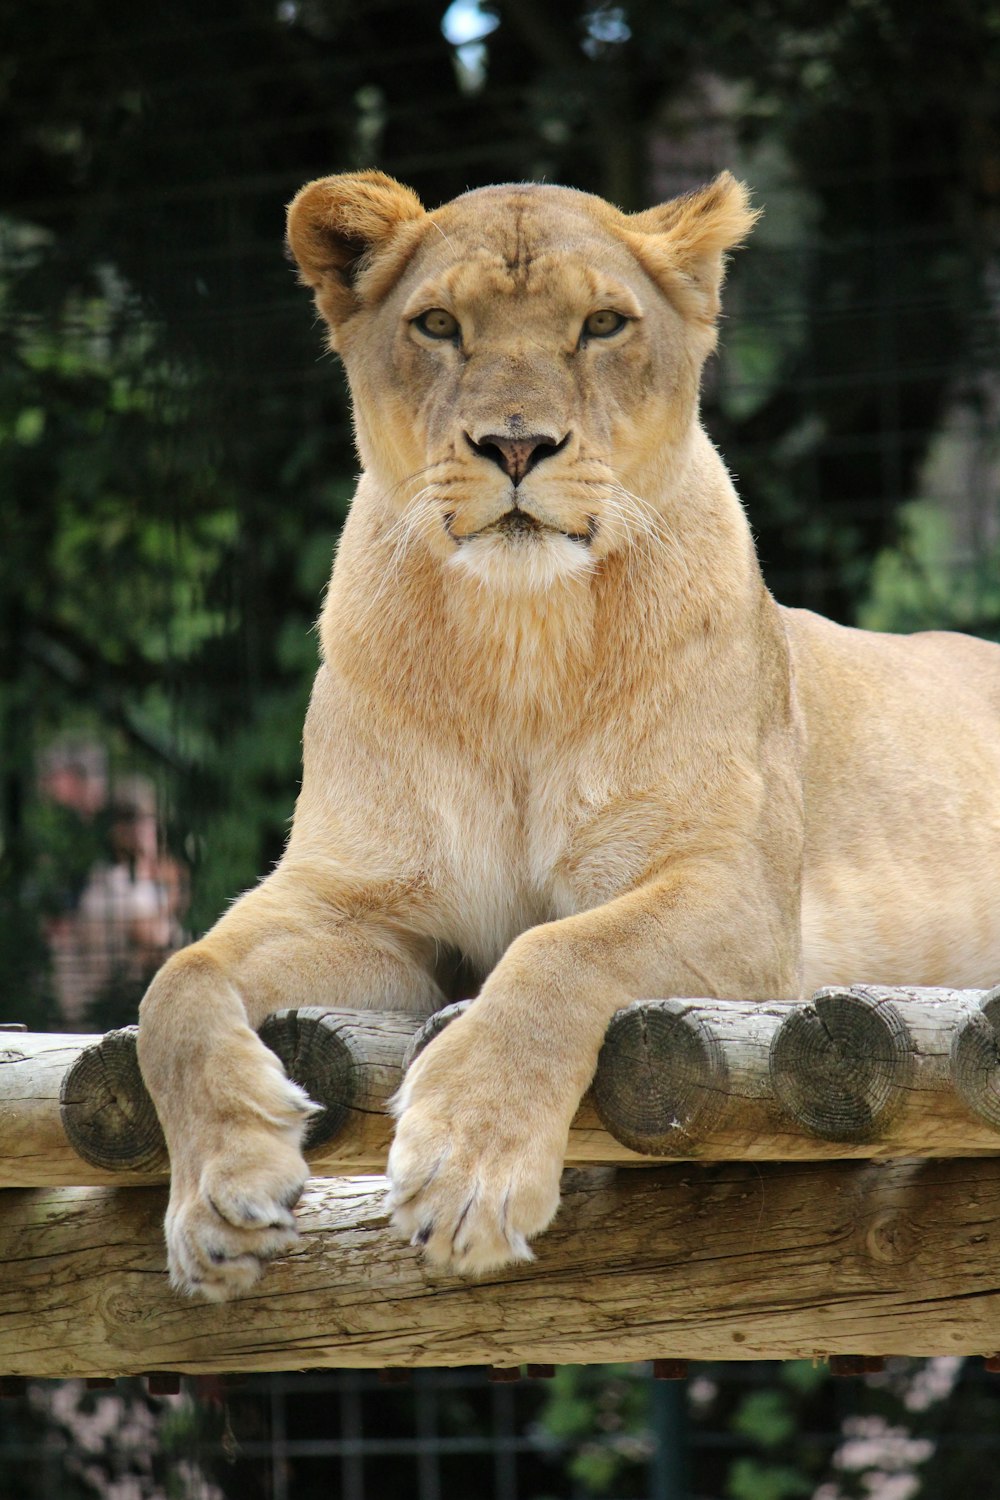 lioness reclining on wood